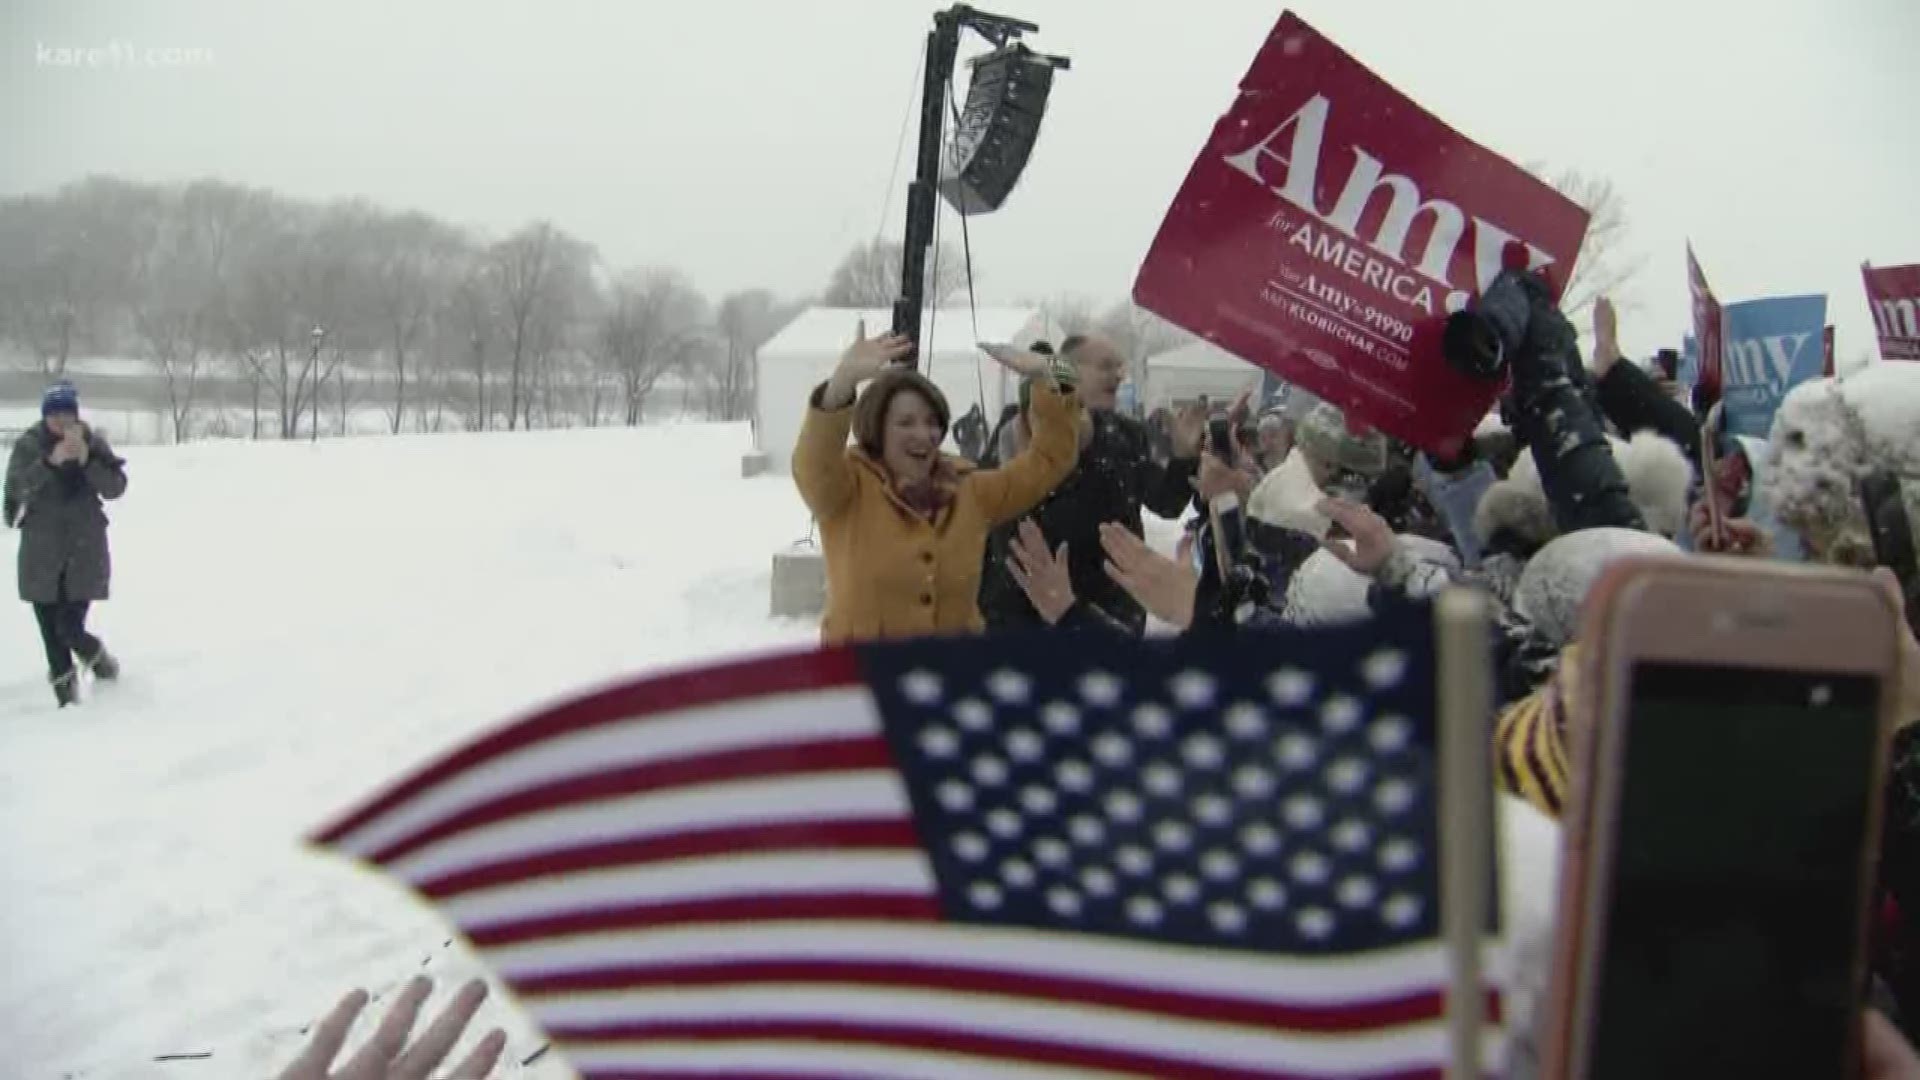 Thousands of Minnesotans braved the blustery conditions to witness history, undeterred as the snow kept falling and Klobuchar made her announcement.